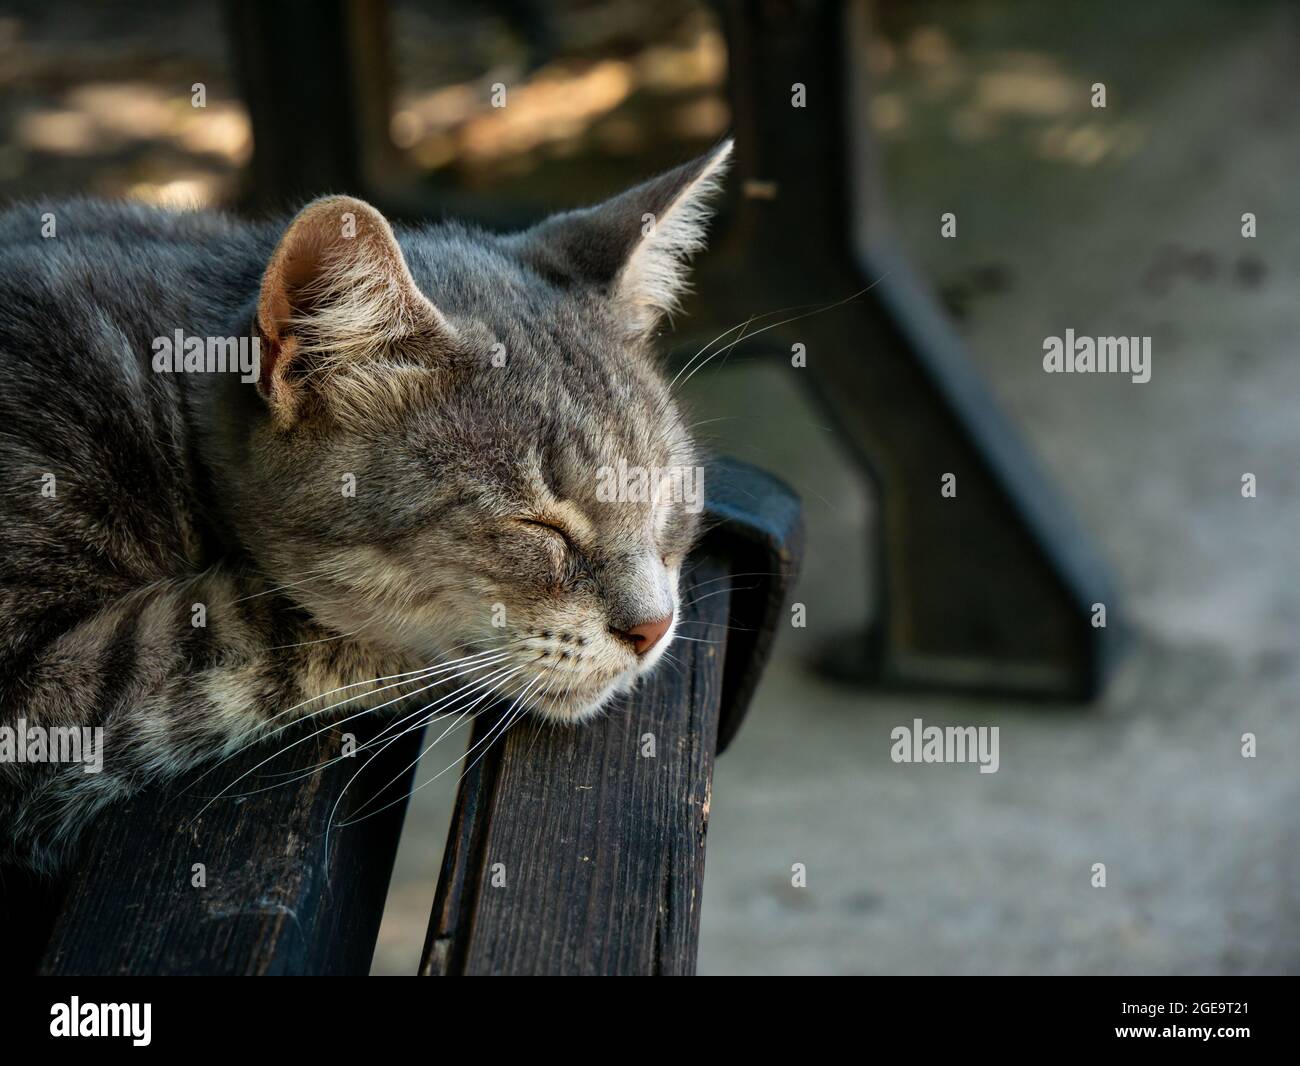 adorable gray and black striped cat sleeps on a wooden bench in the garden in a sunny day Stock Photo